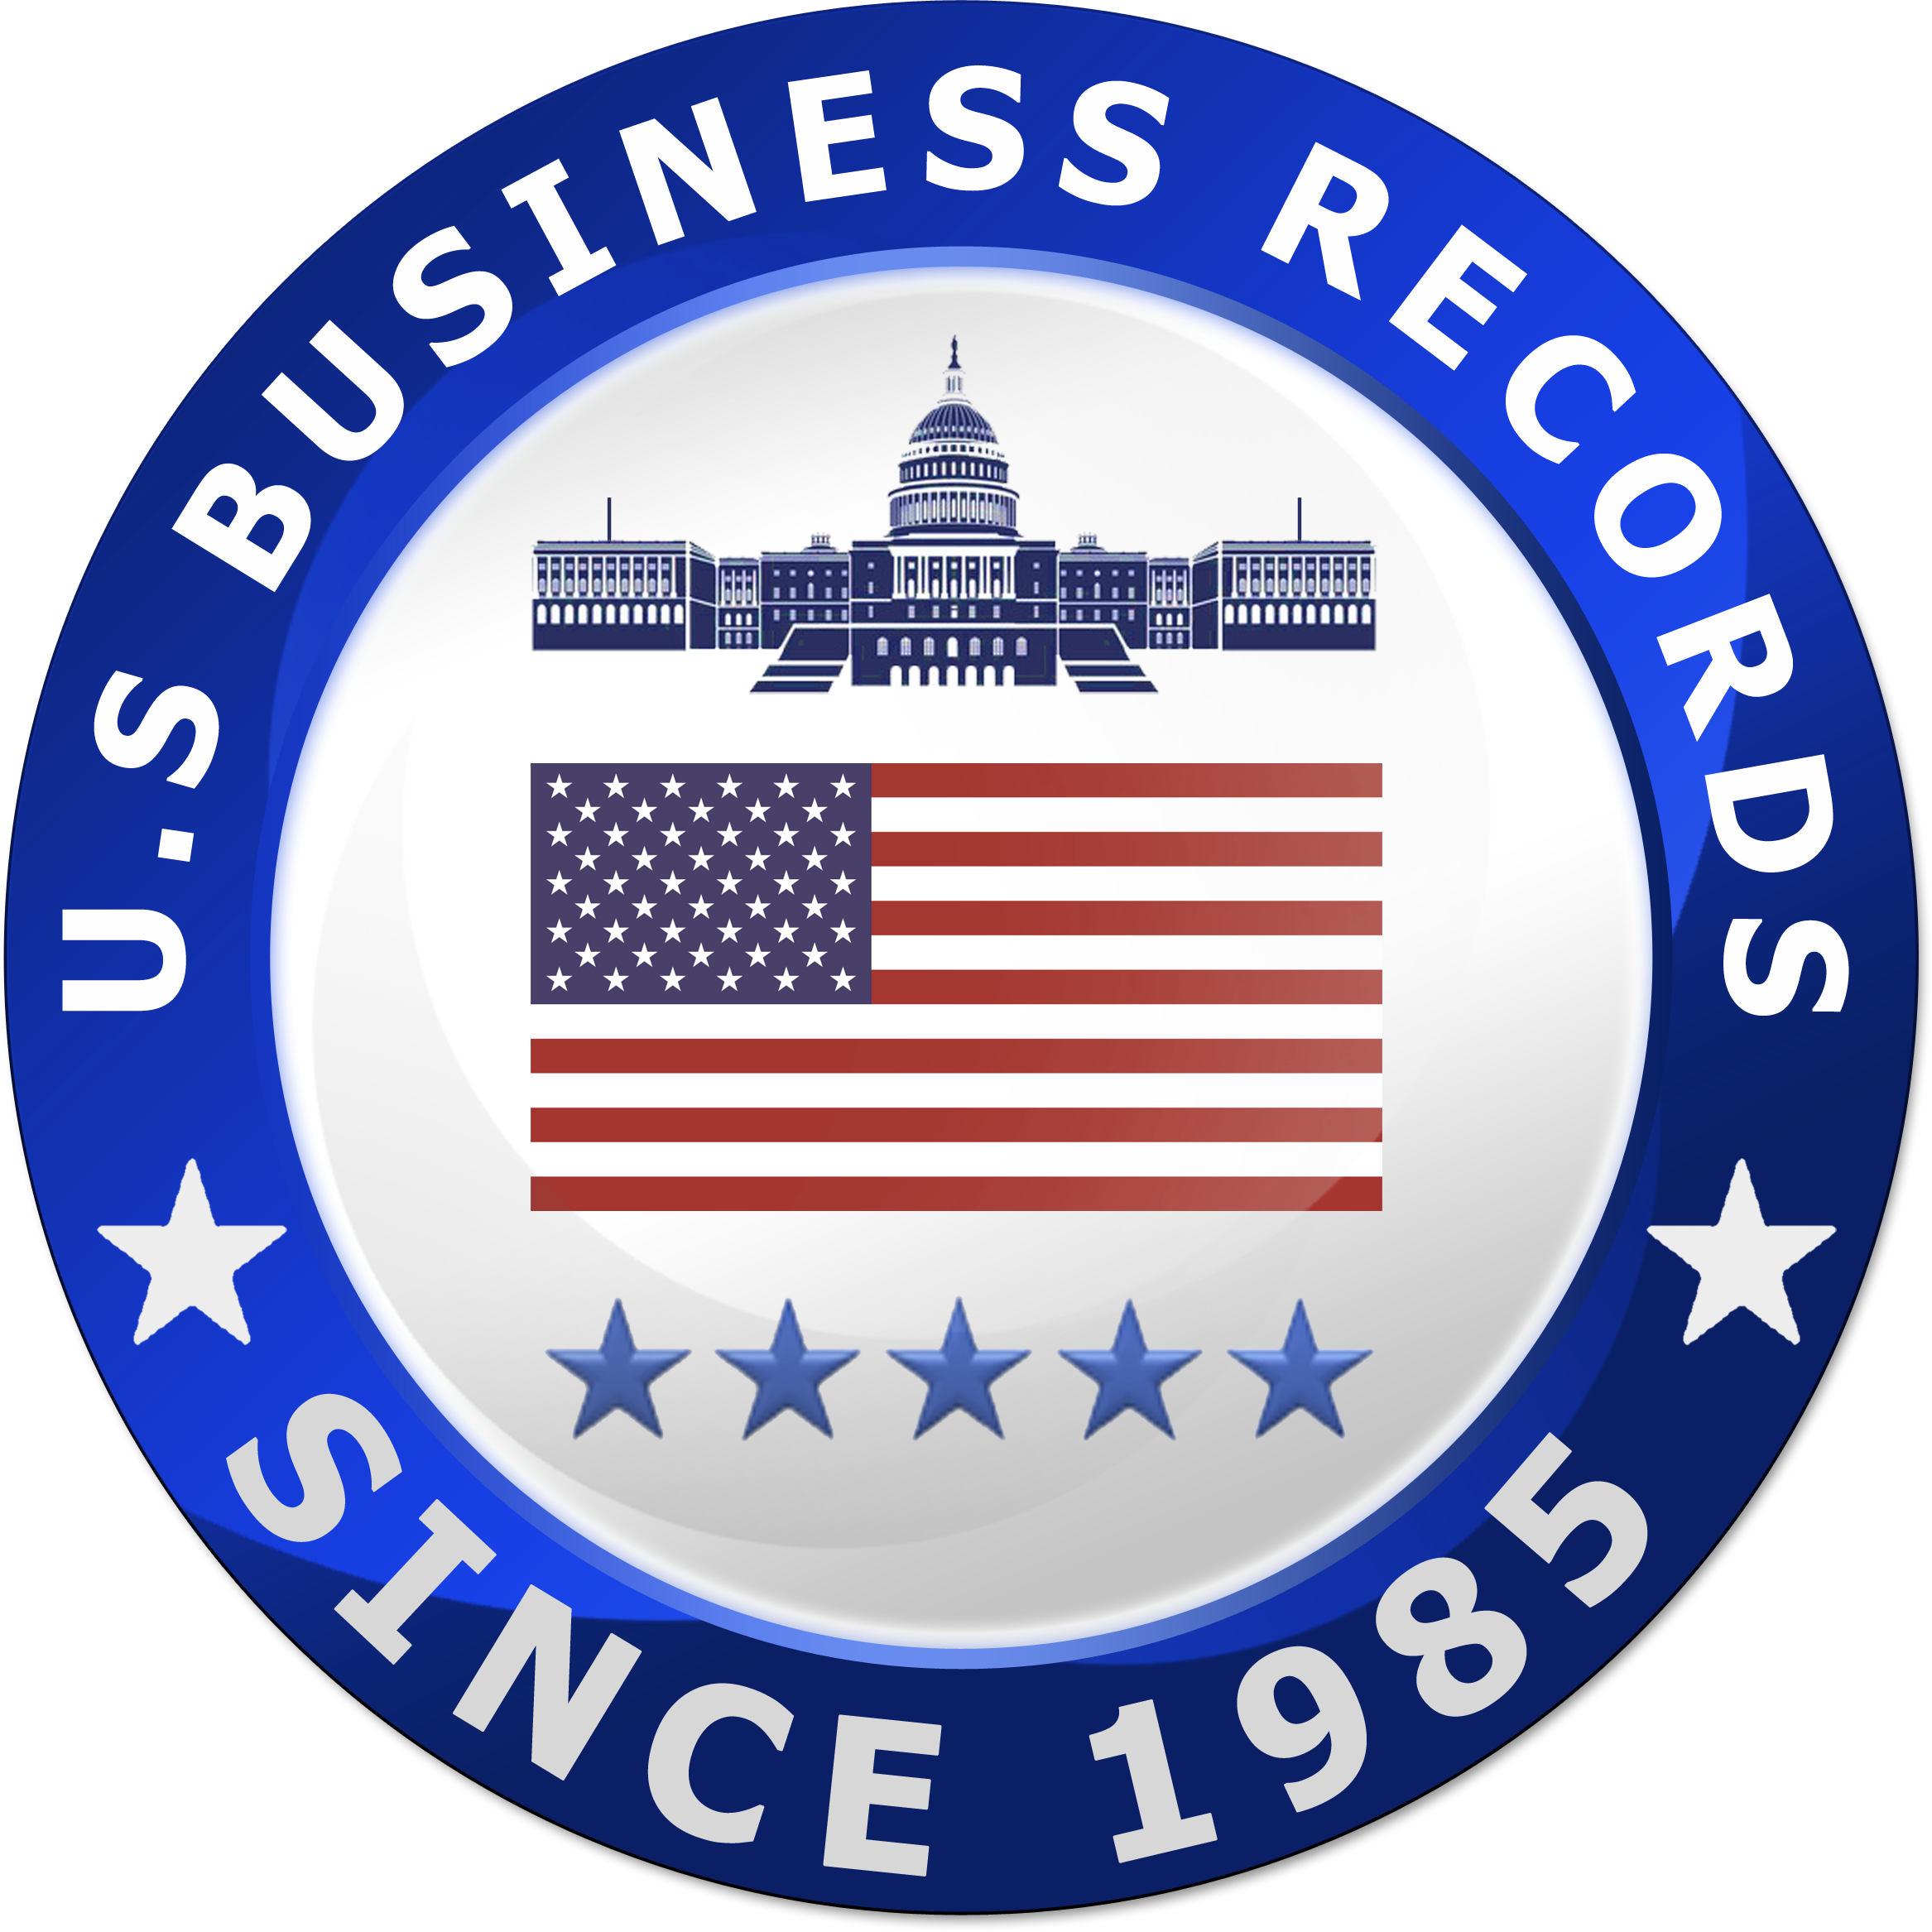 Since In Business Label 79